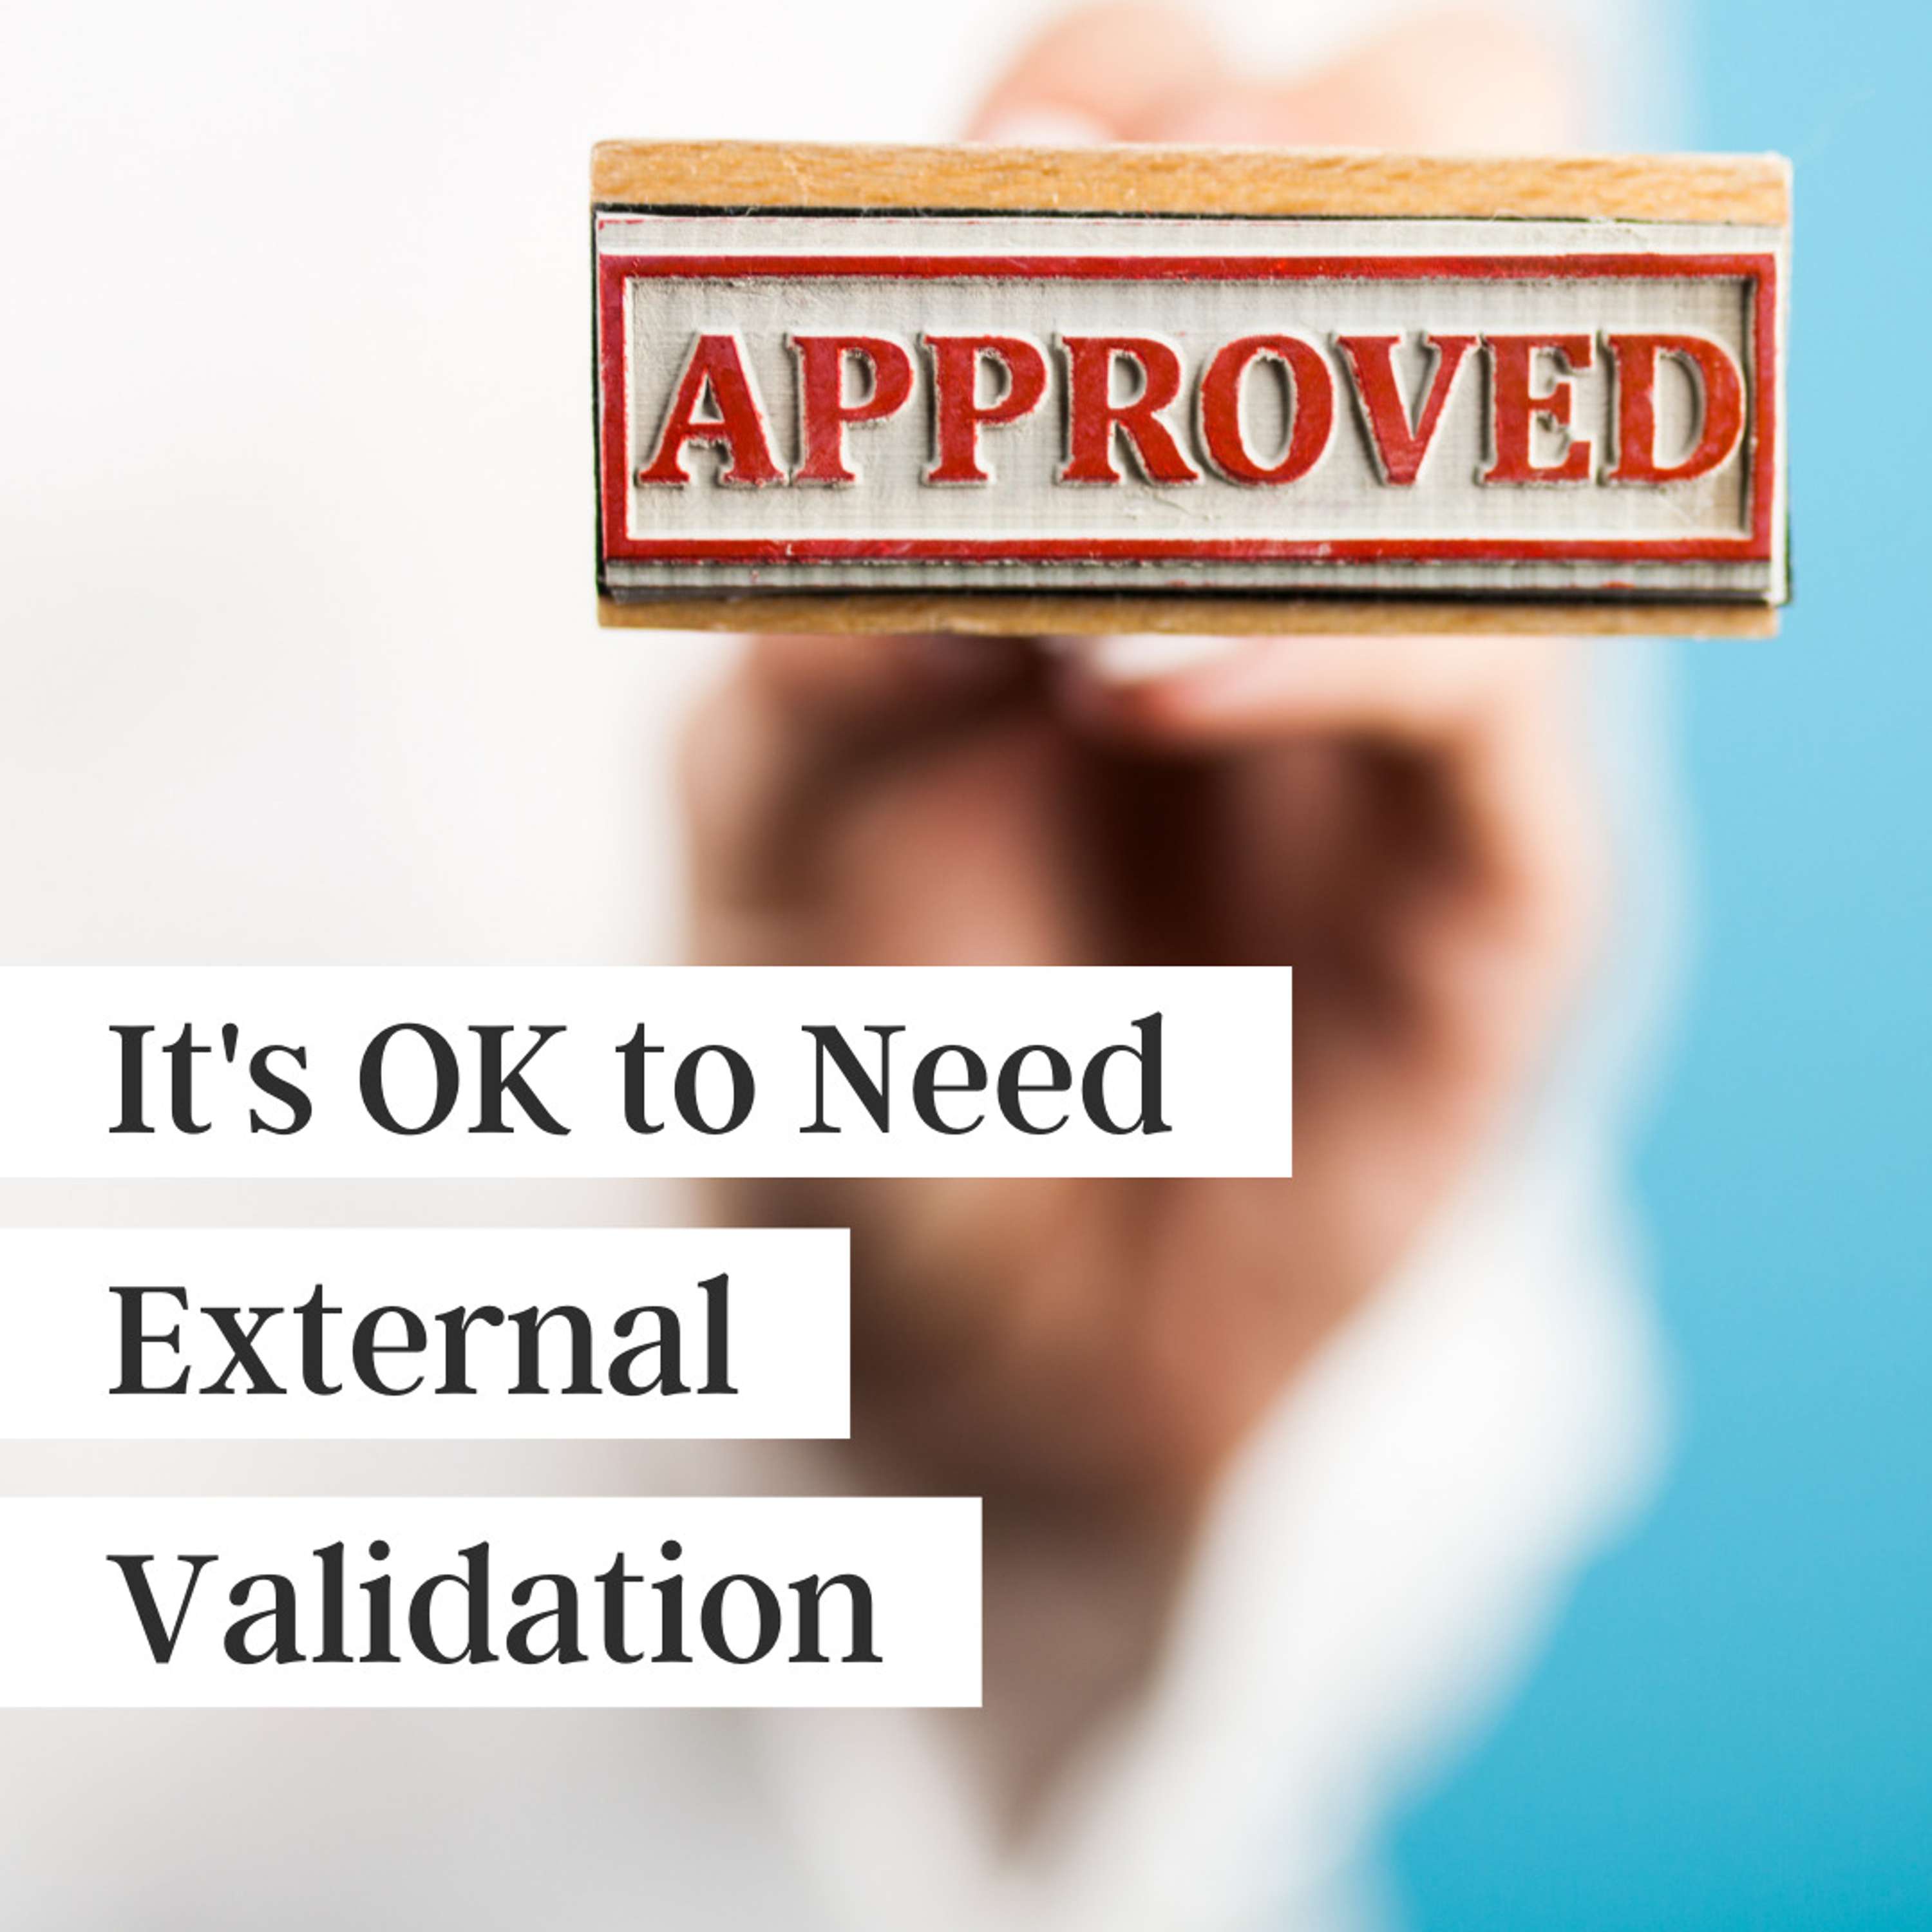 29. Why It's Not Bad to Need External Validation